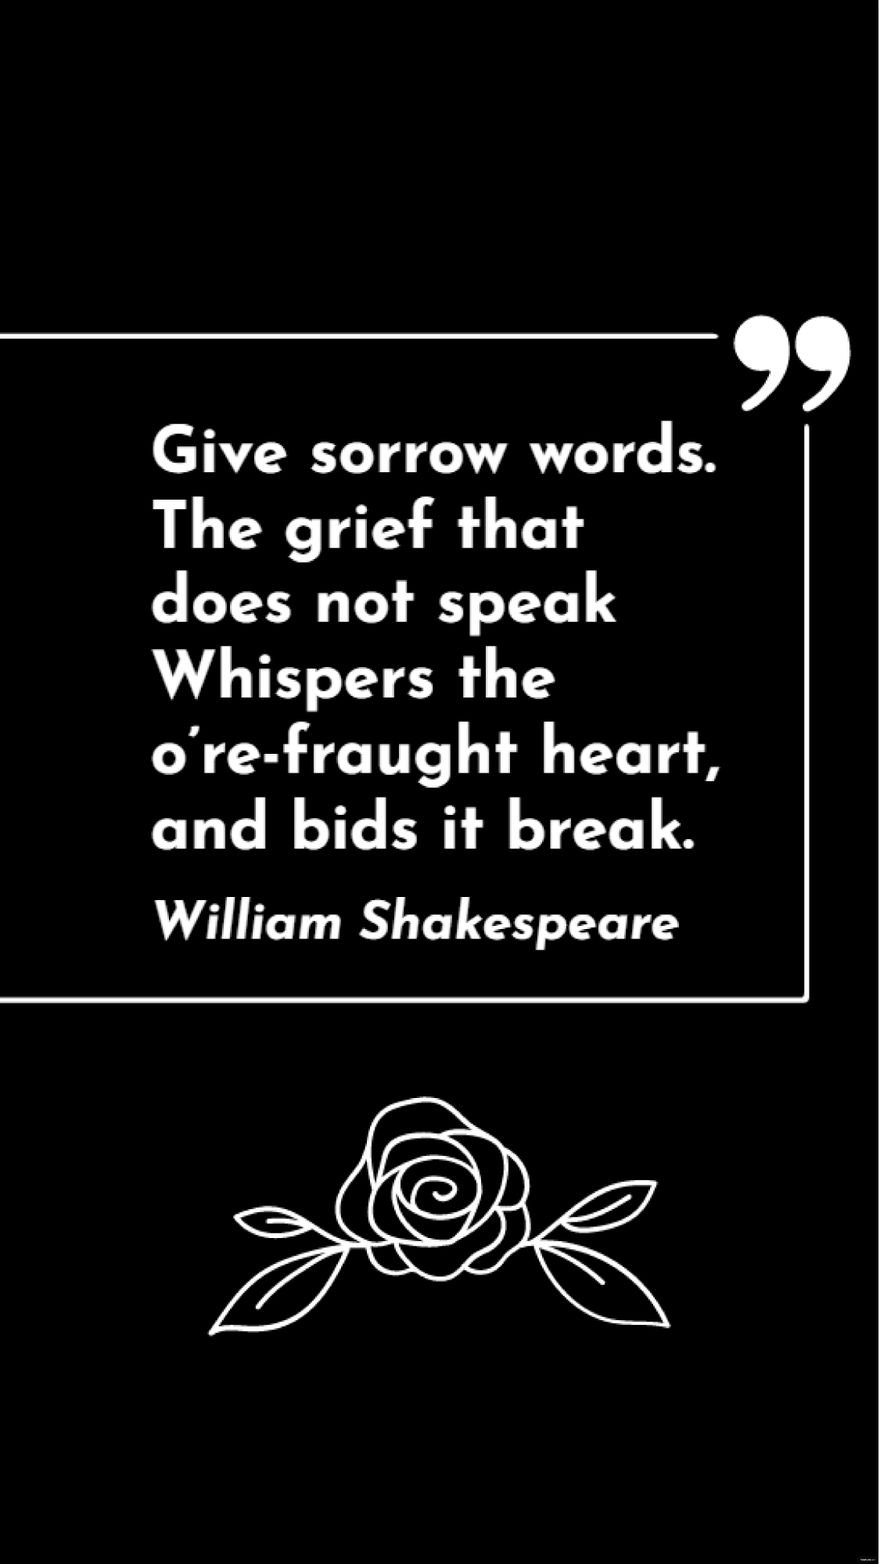 William Shakespeare - Give sorrow words. The grief that does not speak Whispers the o’re-fraught heart, and bids it break.